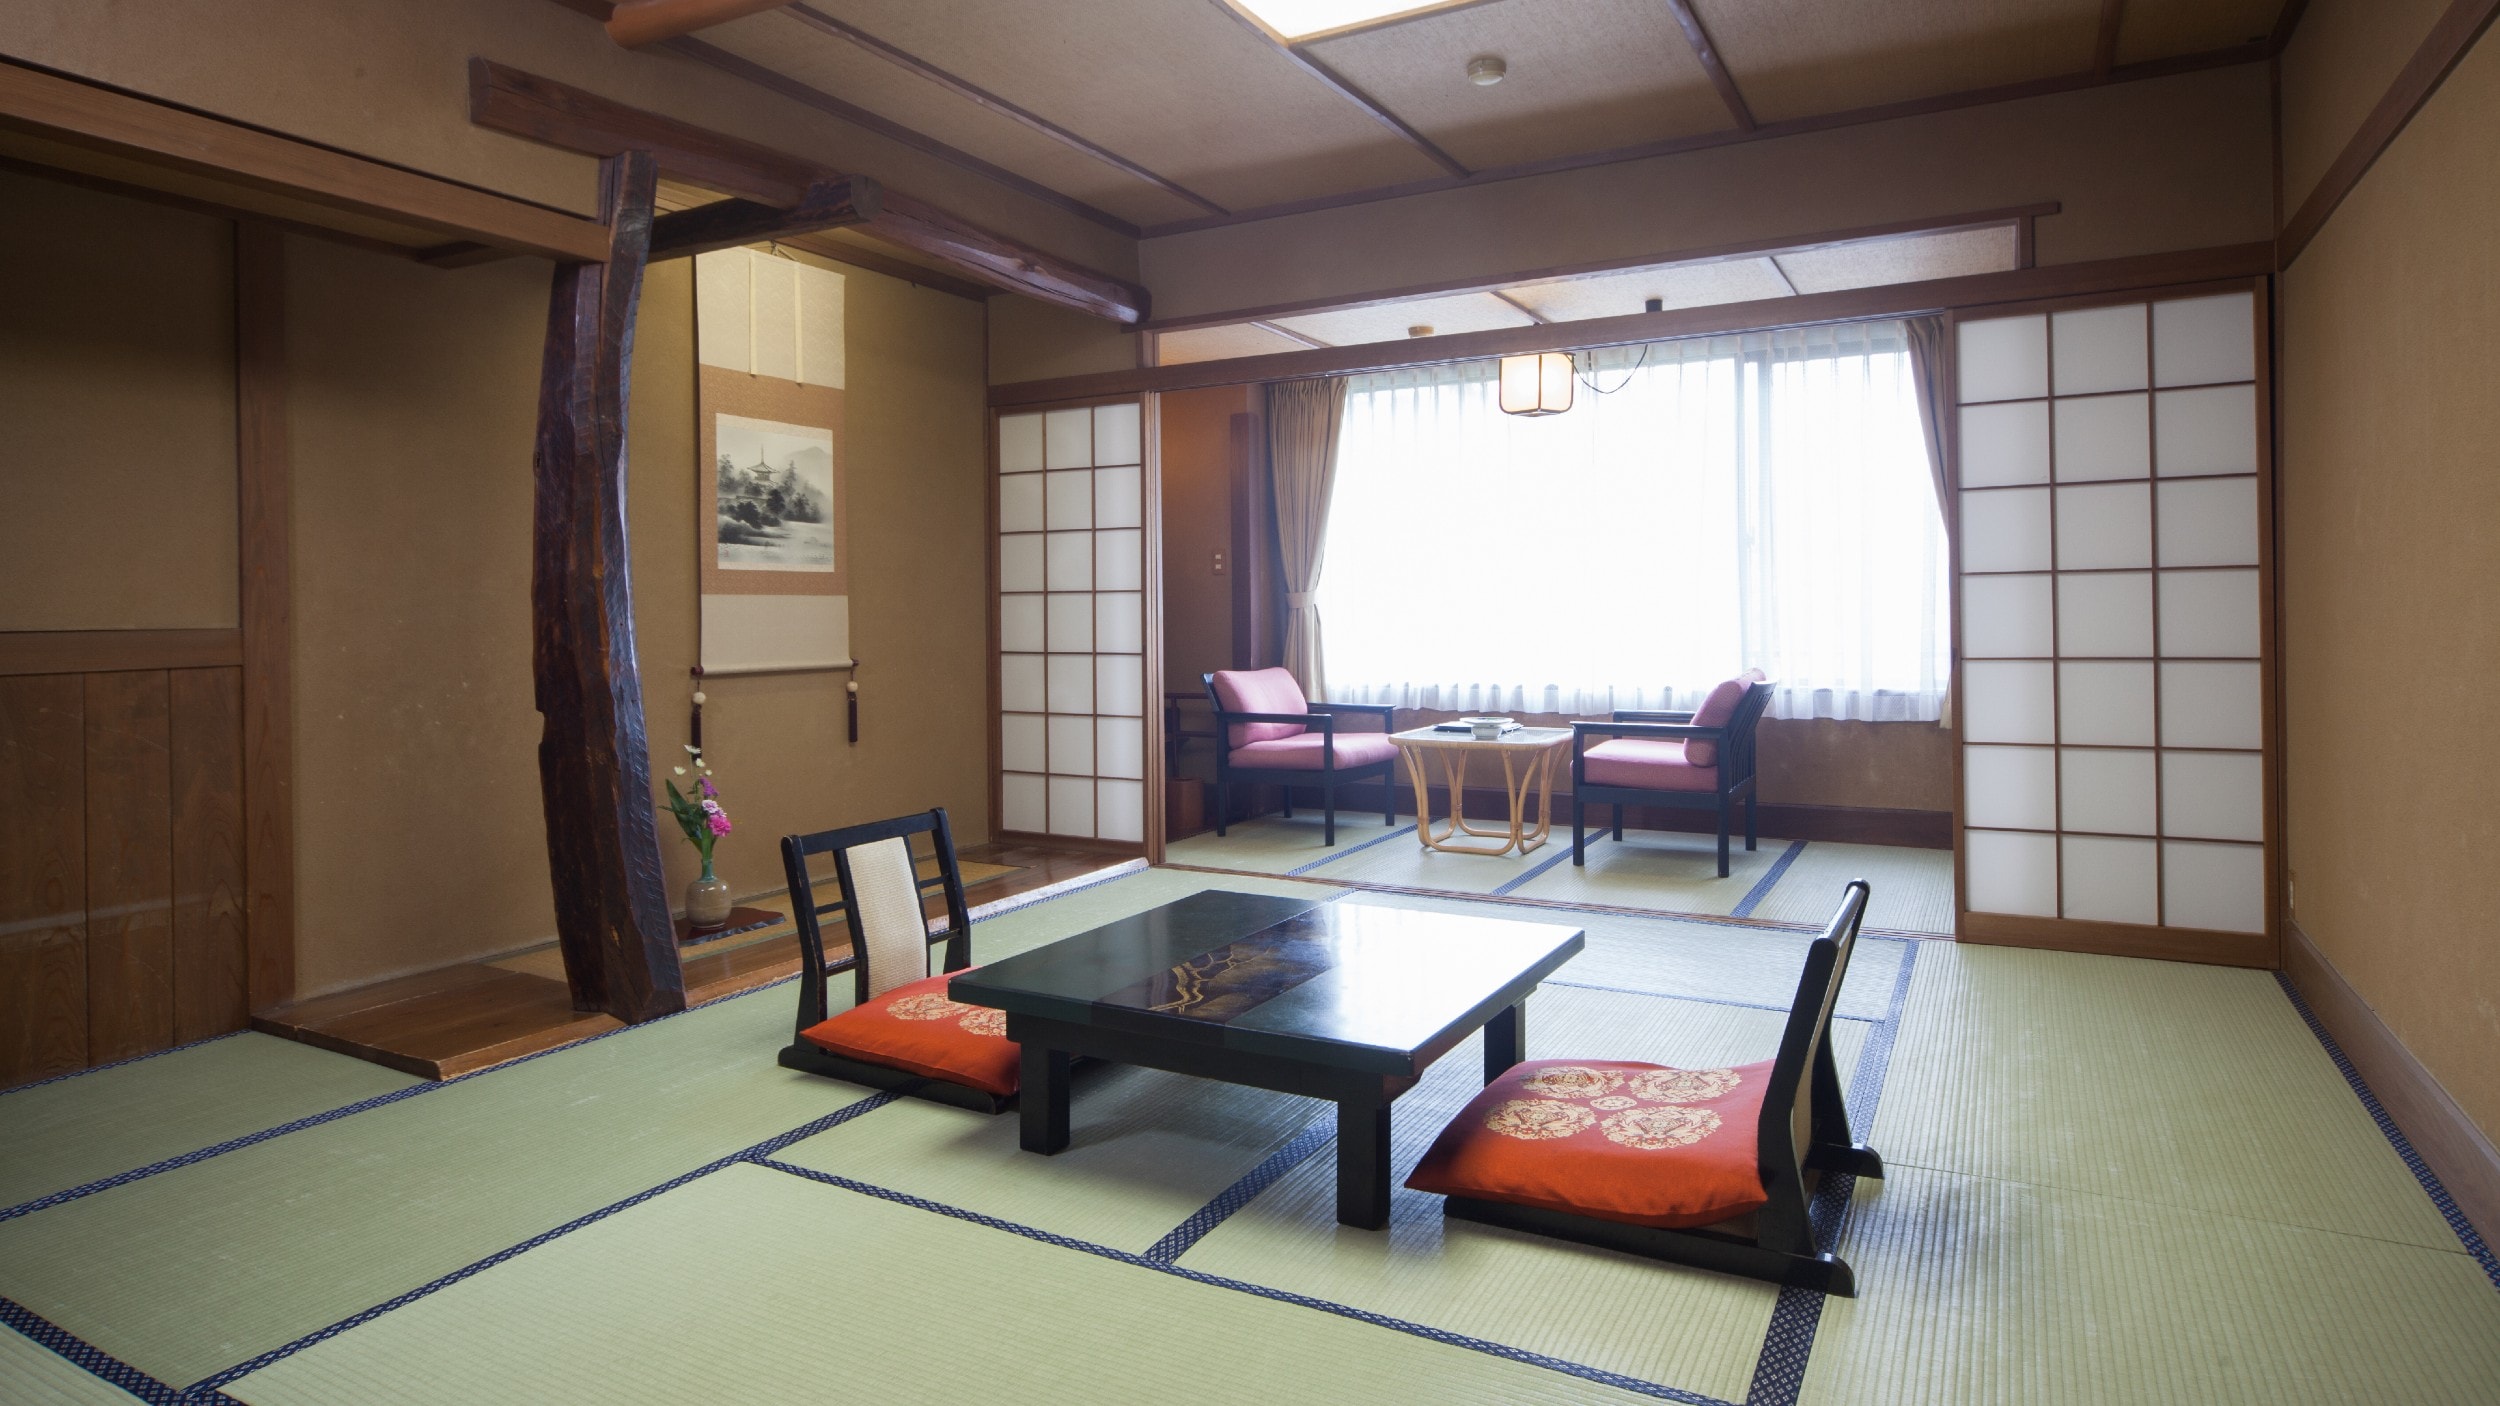 General Japanese-style room 11 tatami mats + wide rim. The main building type guest rooms are made in pure Japanese style.